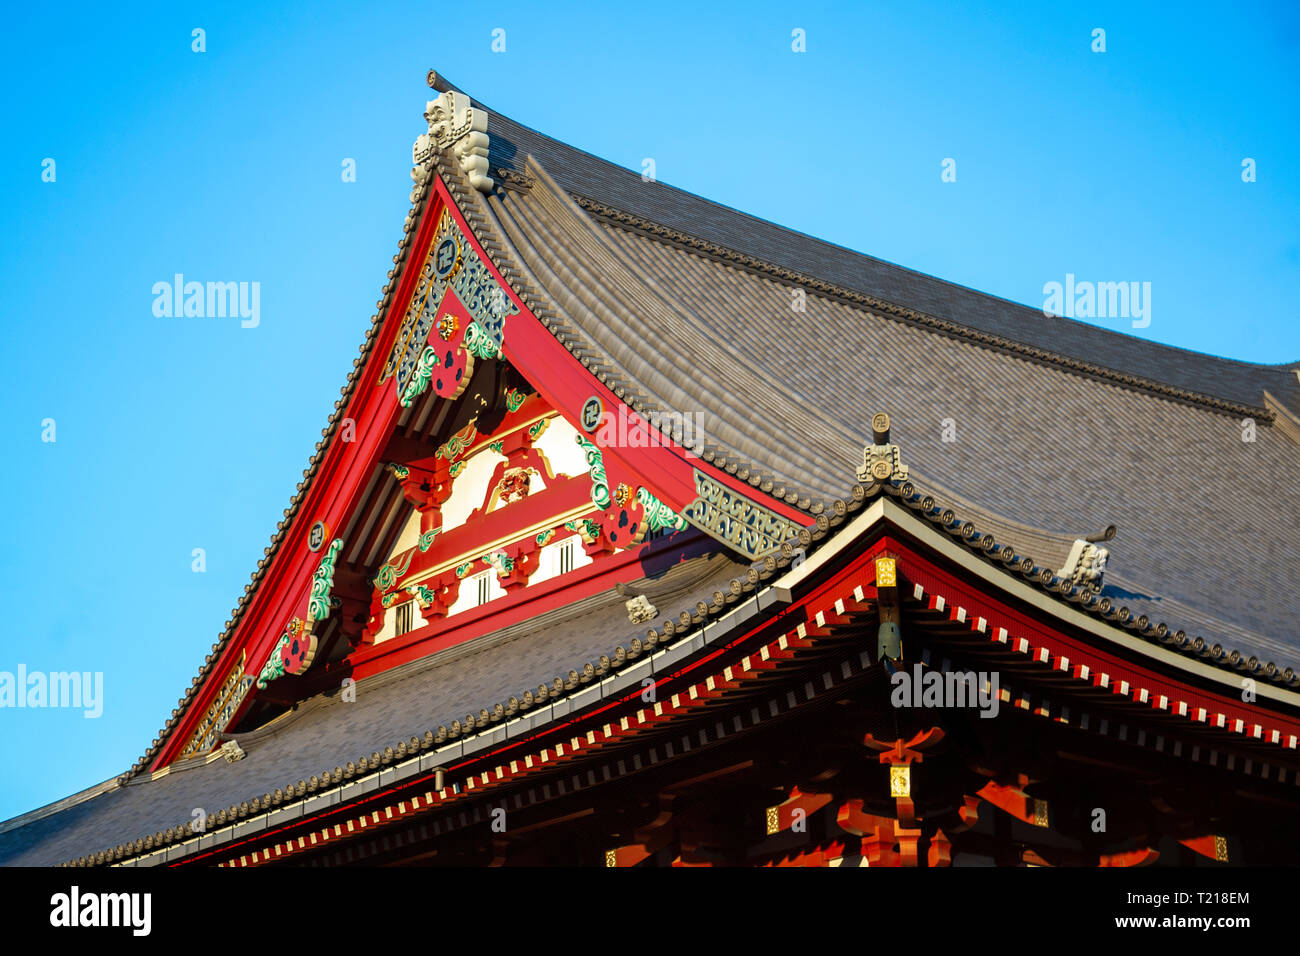 Detail of the Roof of a Buddhist Temple Stock Photo